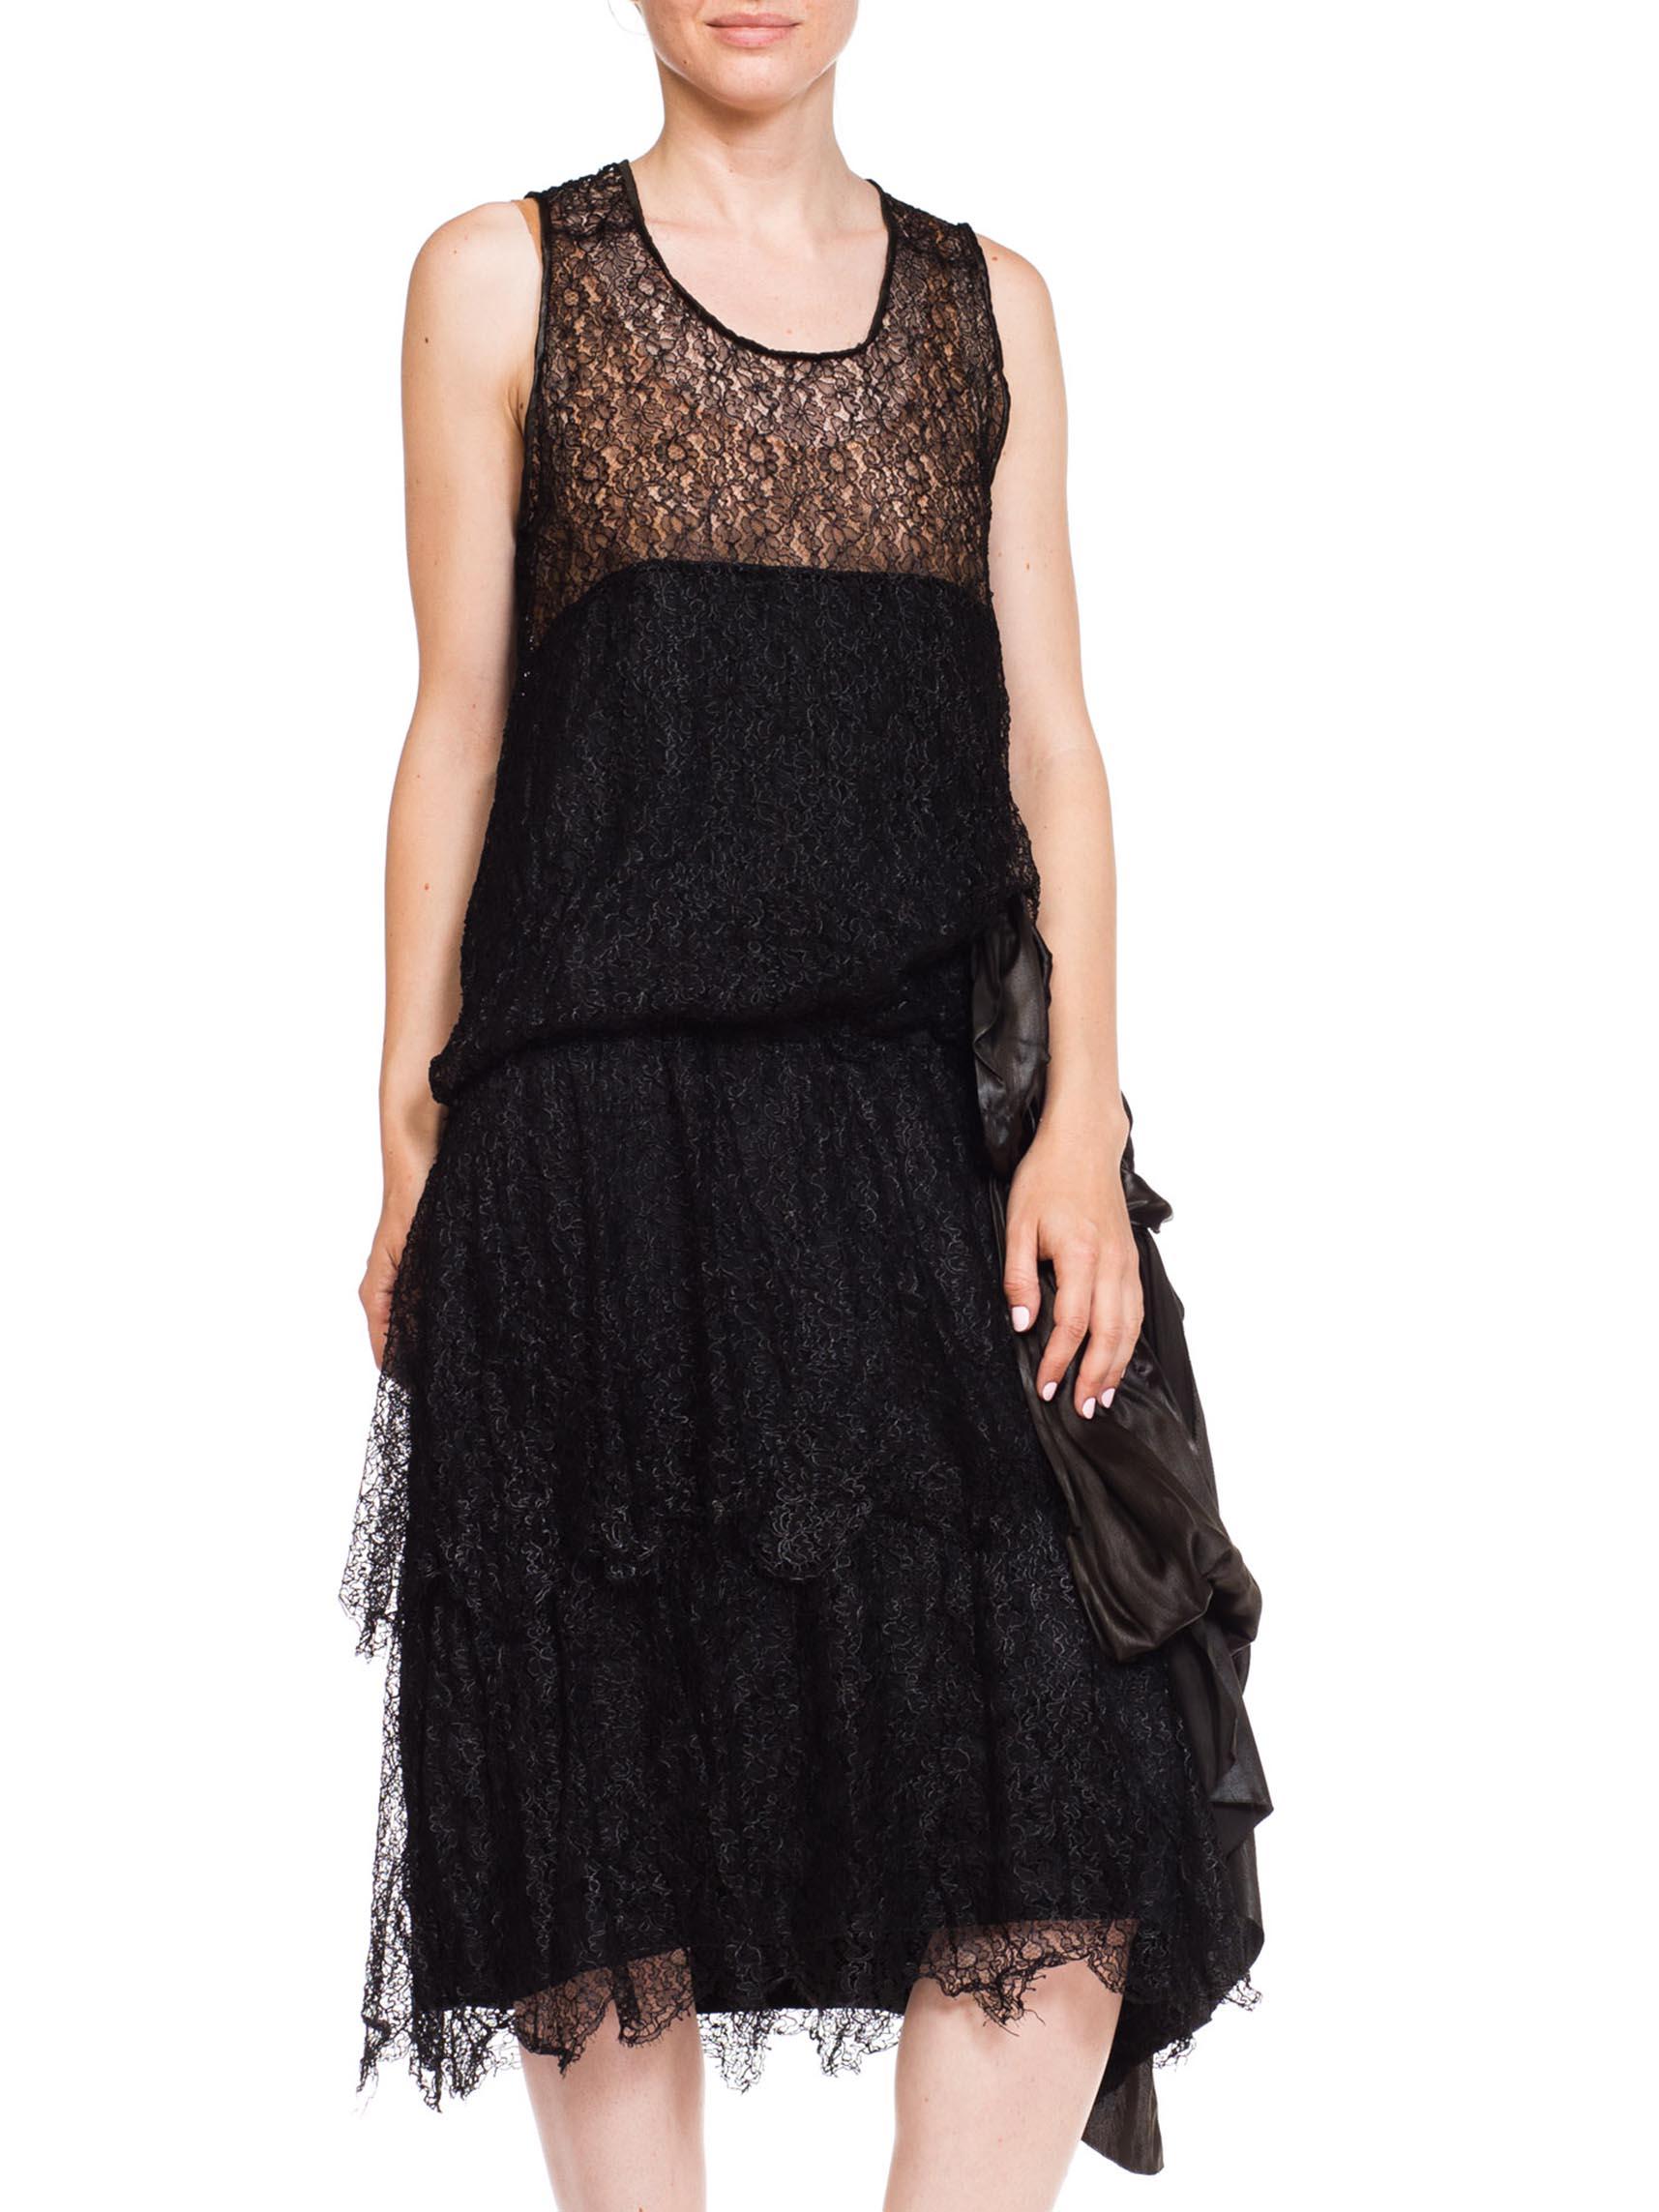 Women's 1920S Black Silk Lace Flapper Cocktail Dress With Built In Slip & Large Charmeu For Sale